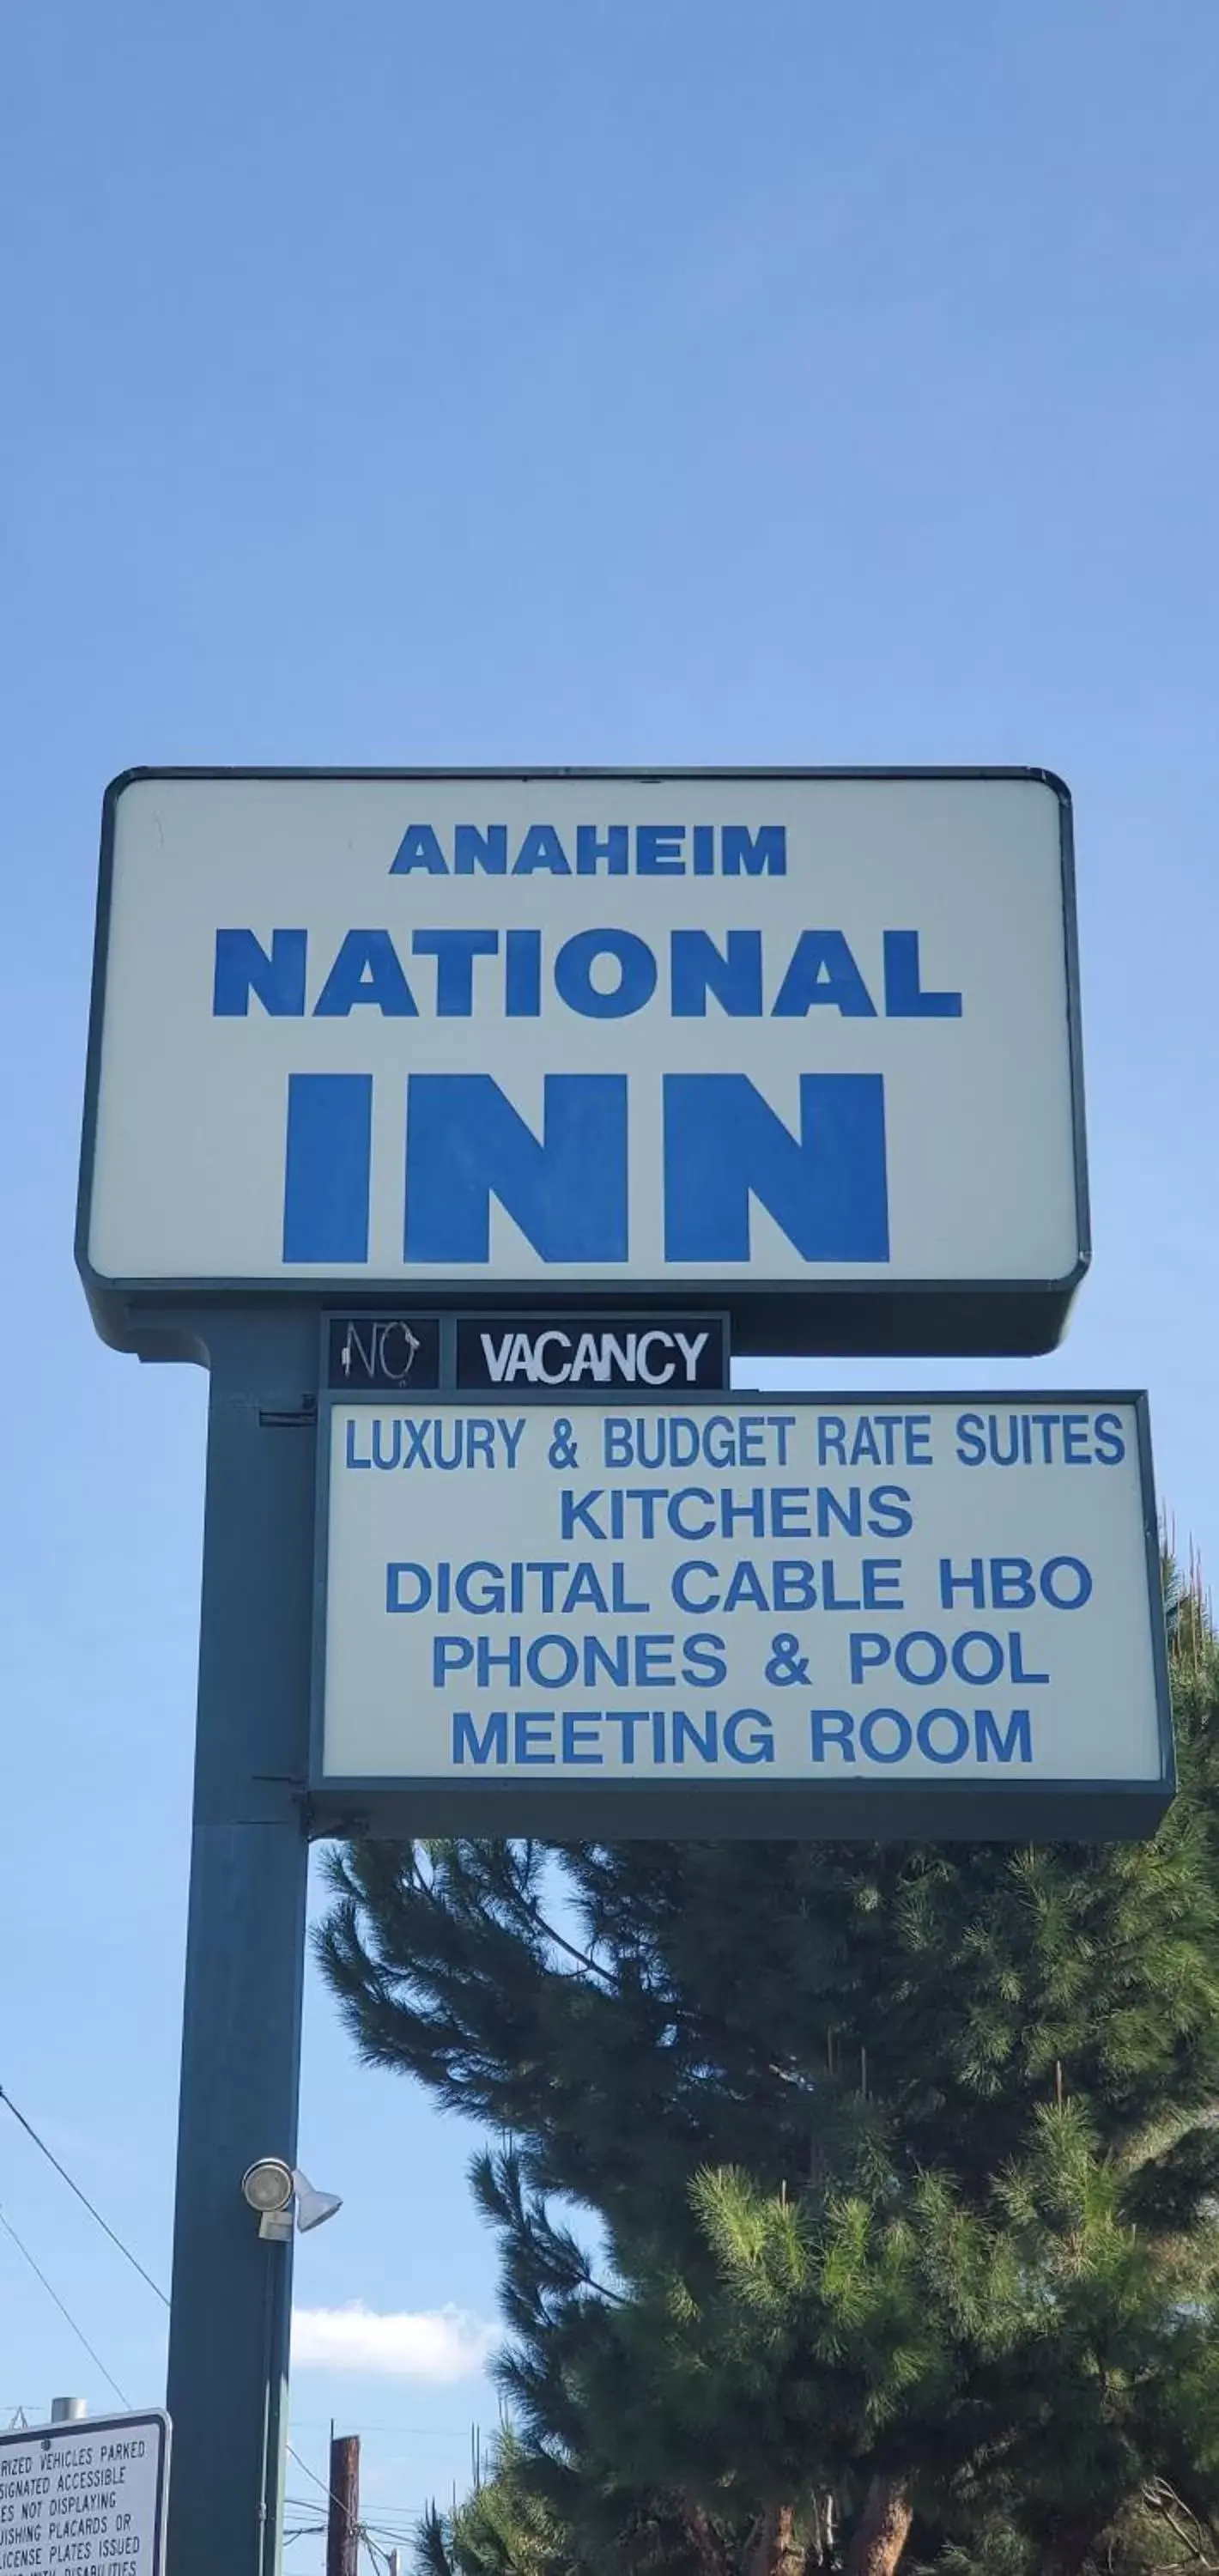 Property logo or sign in Anaheim National Inn